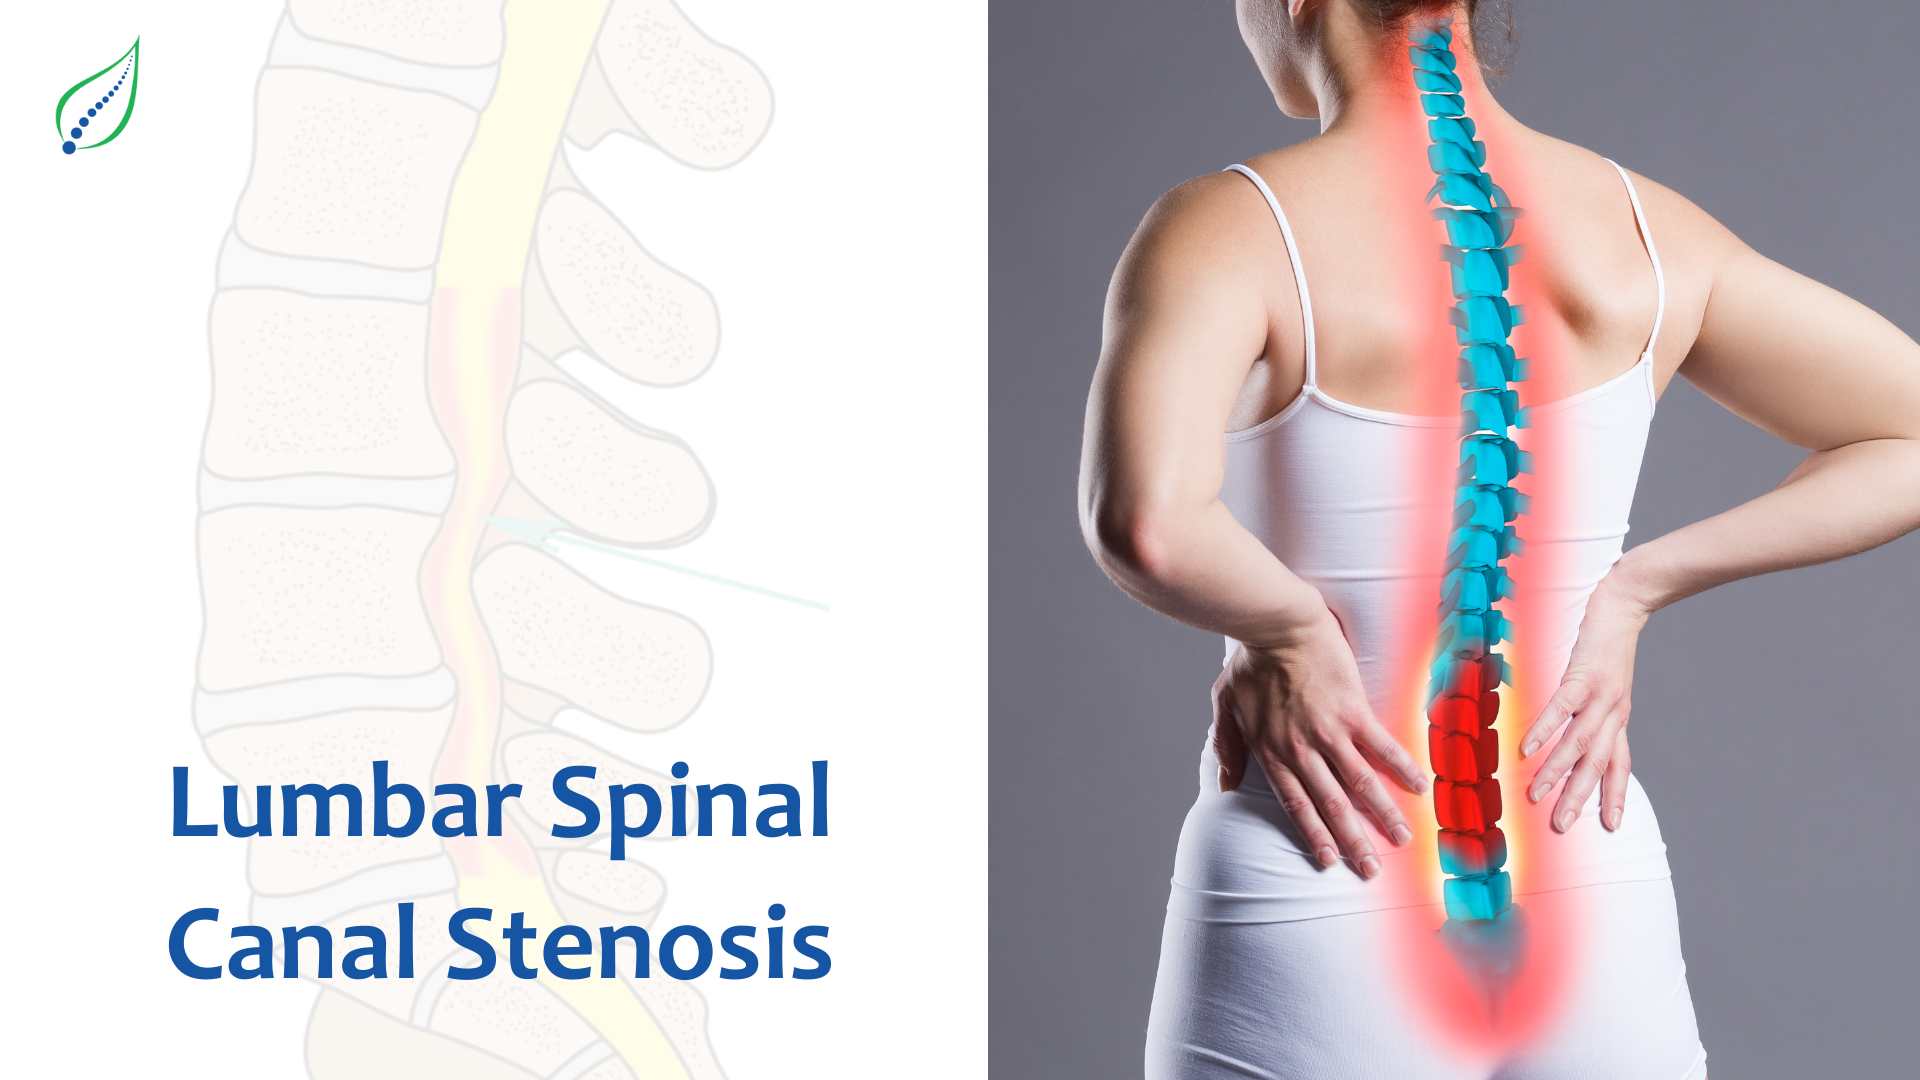 Lumbar Spinal Canal Stenosis: Causes, Symptoms, and Treatments